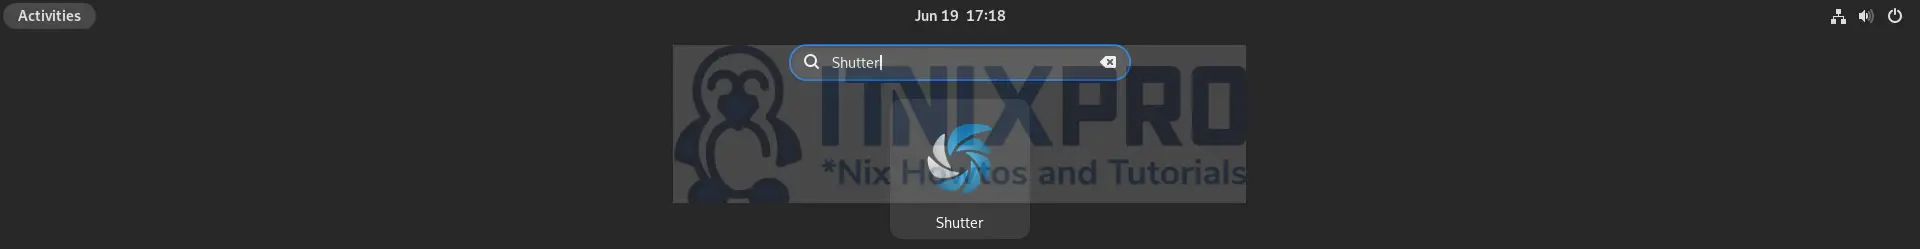 Install Shutter on OpenSUSE